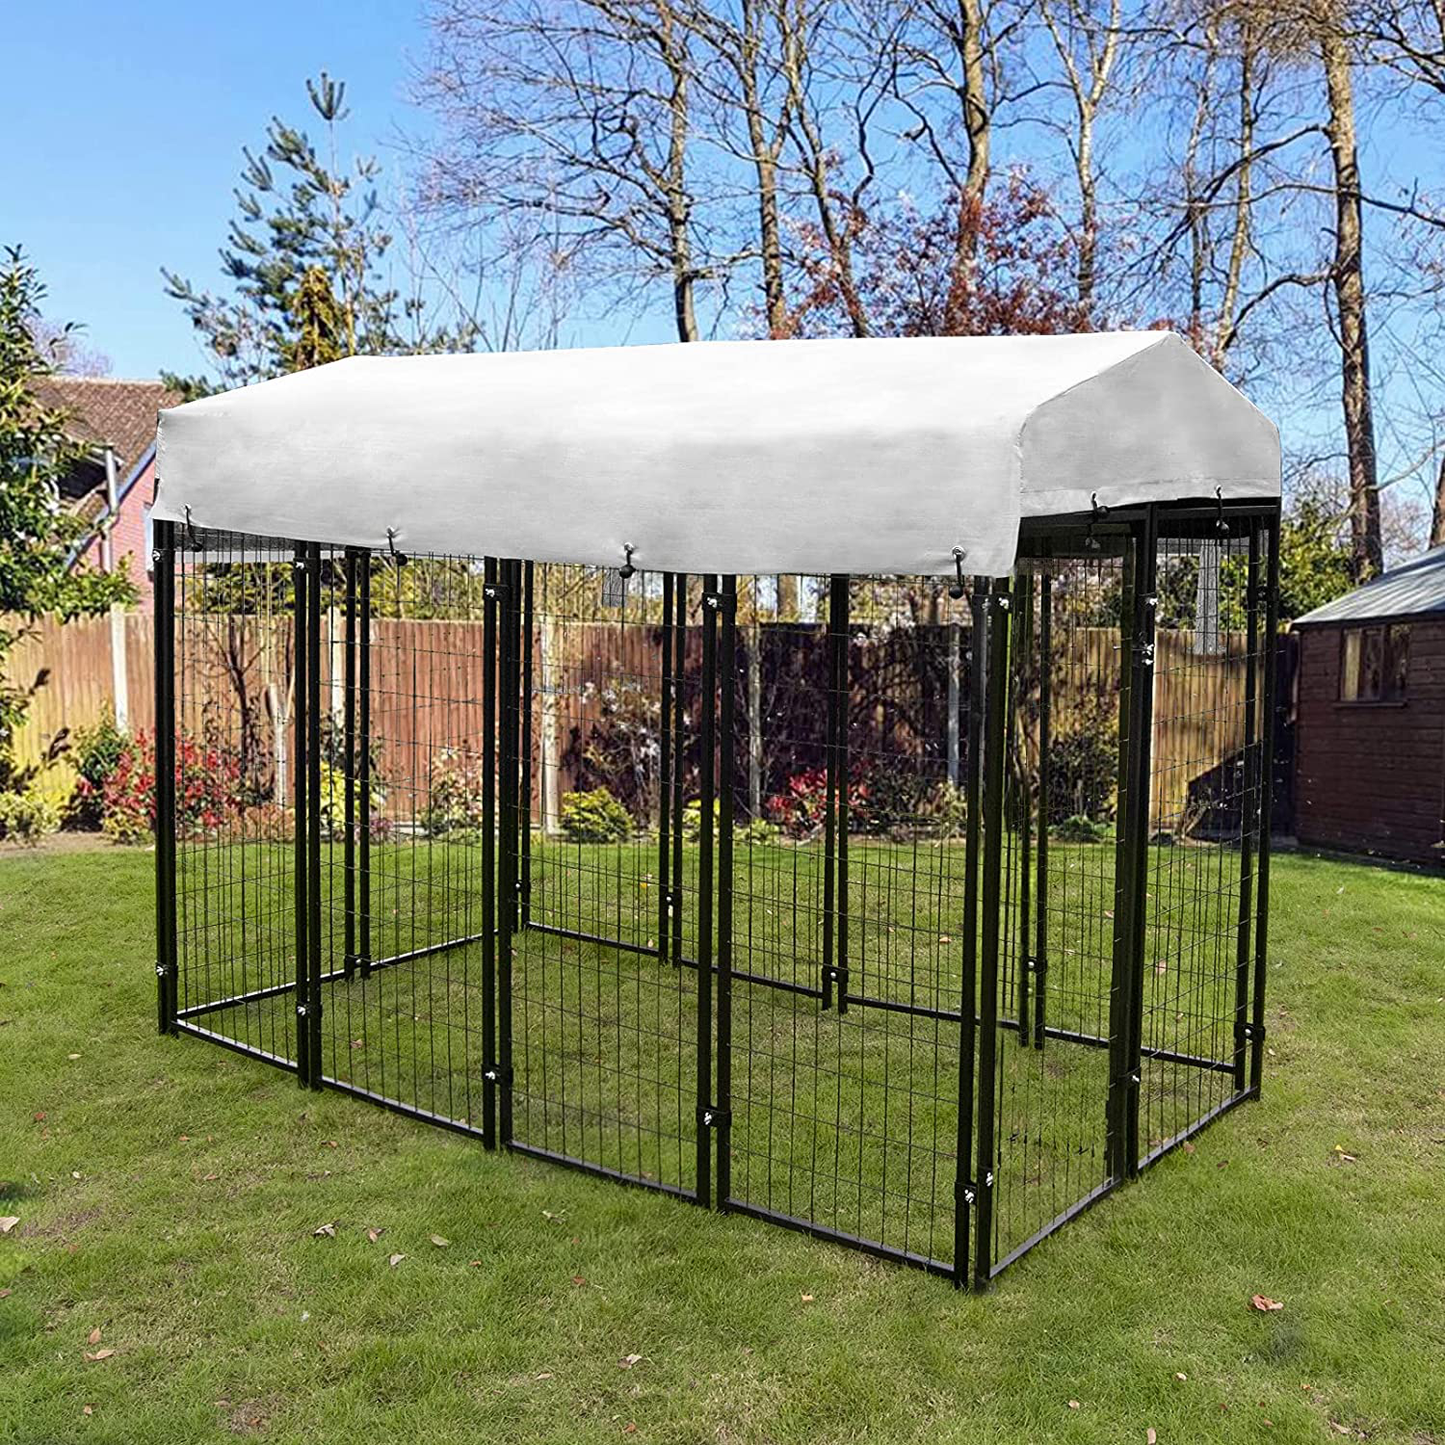 Polar Aurora Dog Playpen House Heavy Duty Large Outdoor Dog Kennel Galvanized Steel Fence with Uv-Resistant Oxford Cloth Roof & Secure Lock